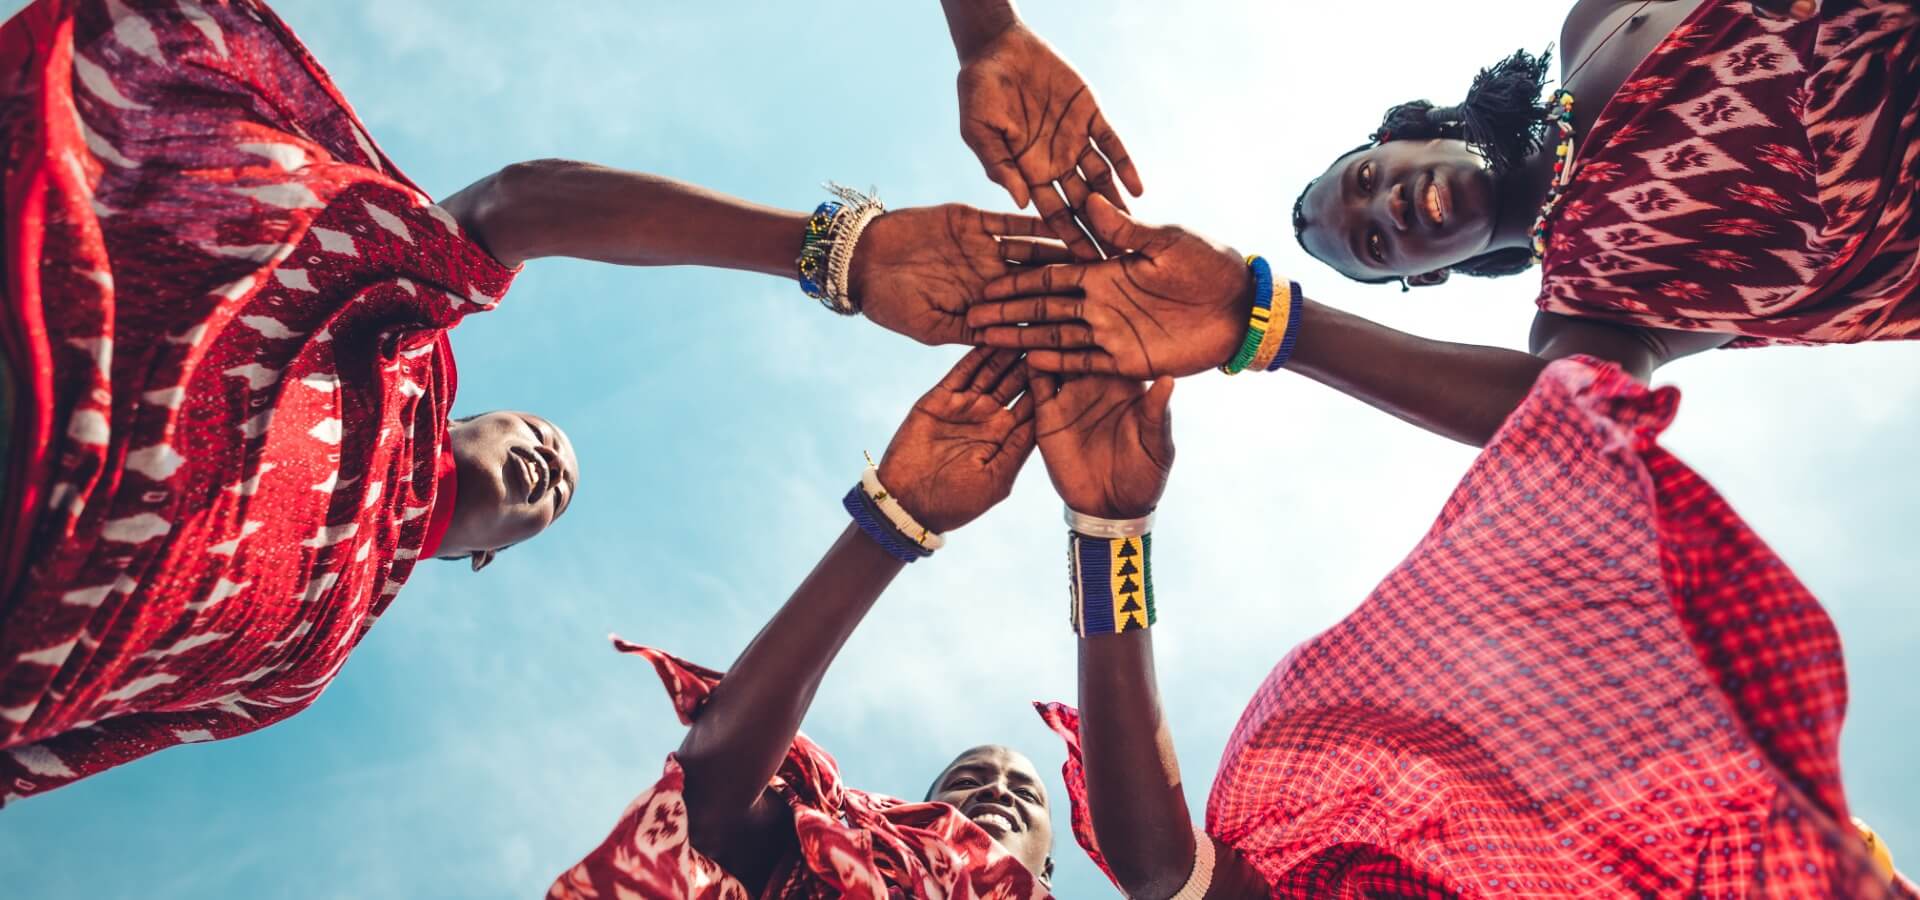 Group of Black women joining their hands together, Grupo de mujeres afrodescendientes uniendo las manos, low-angle shot with the sky in the background.